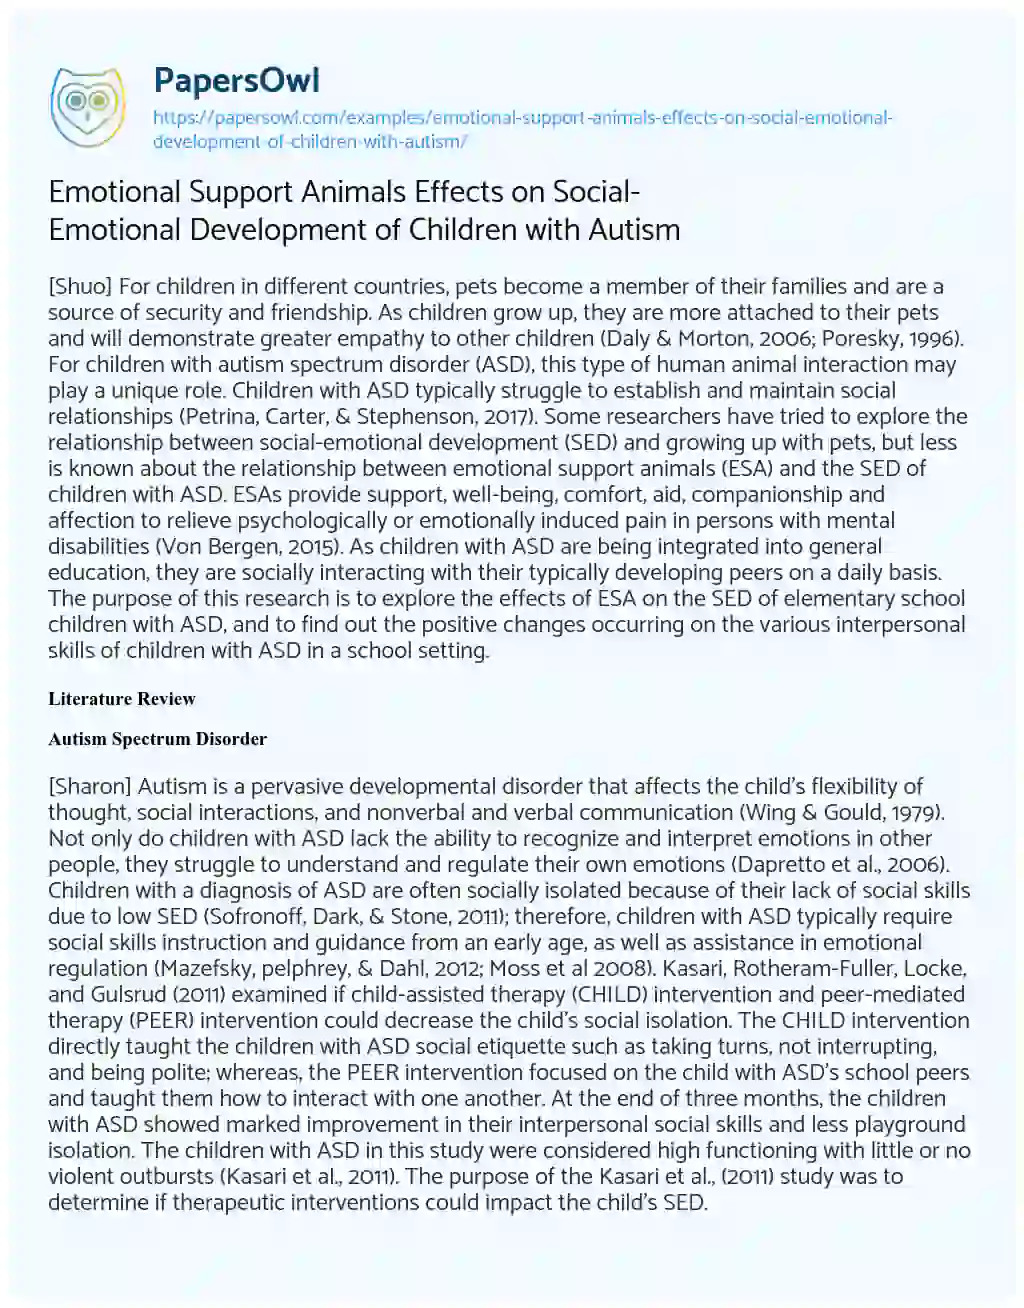 Essay on Emotional Support Animals Effects on Social-Emotional Development of Children with Autism